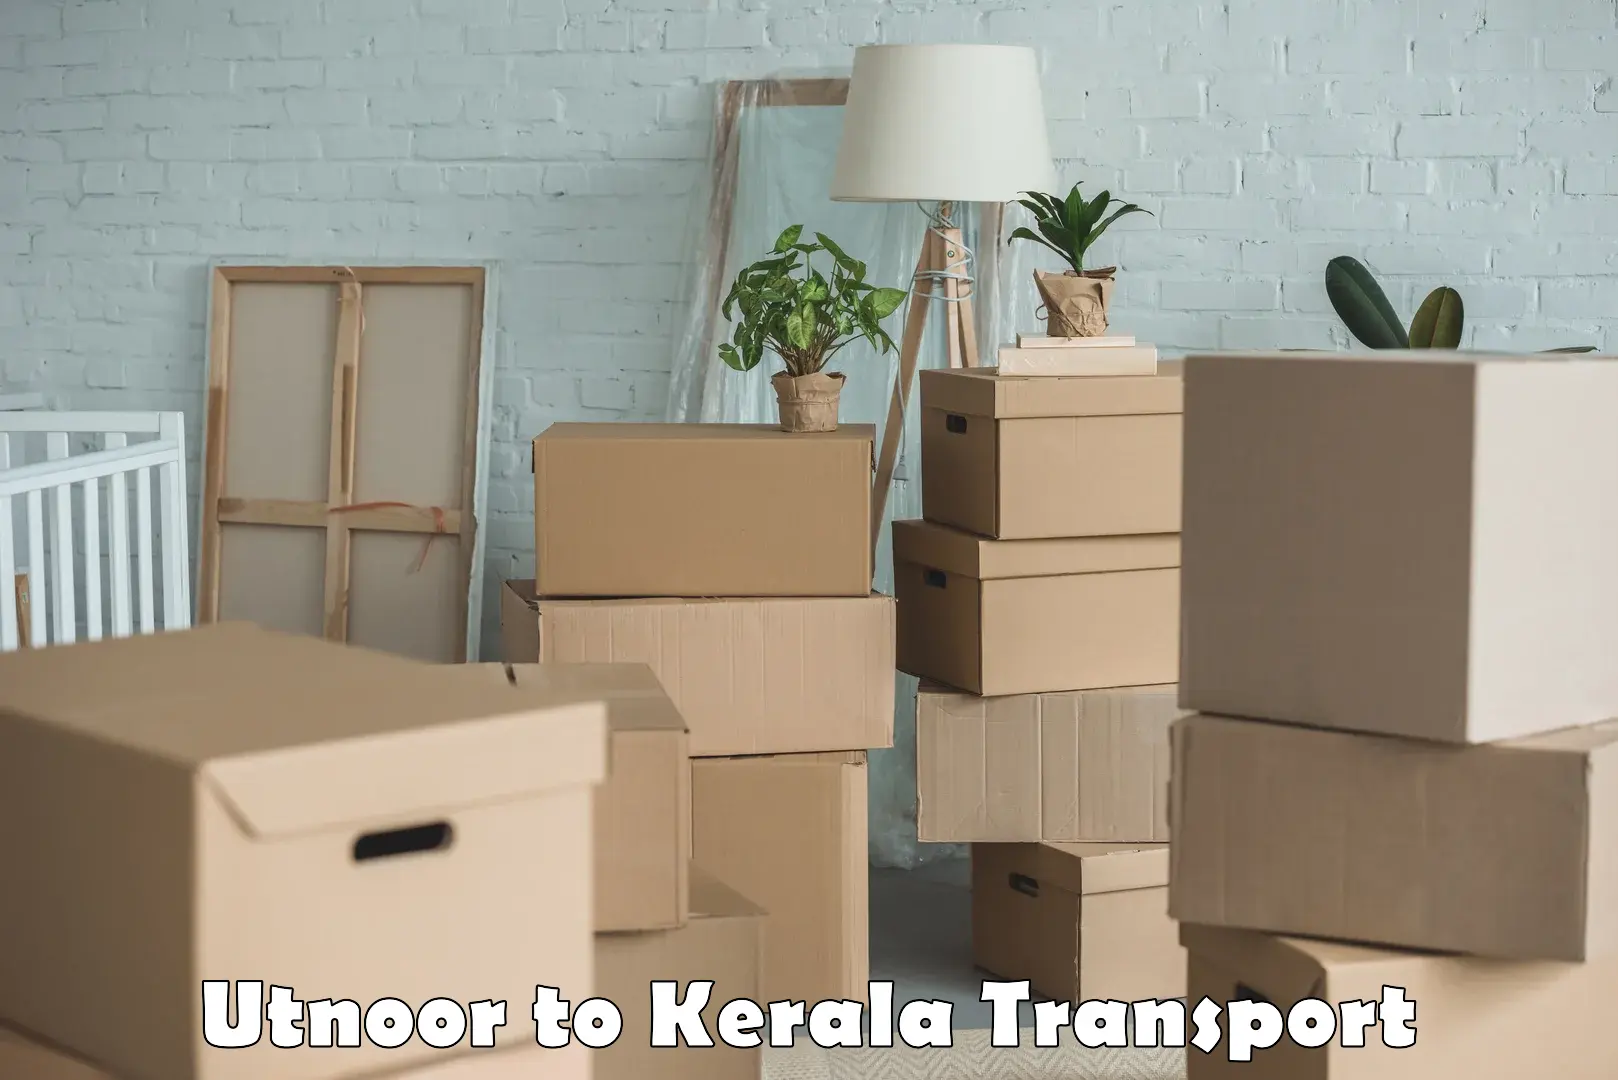 Express transport services Utnoor to Palai